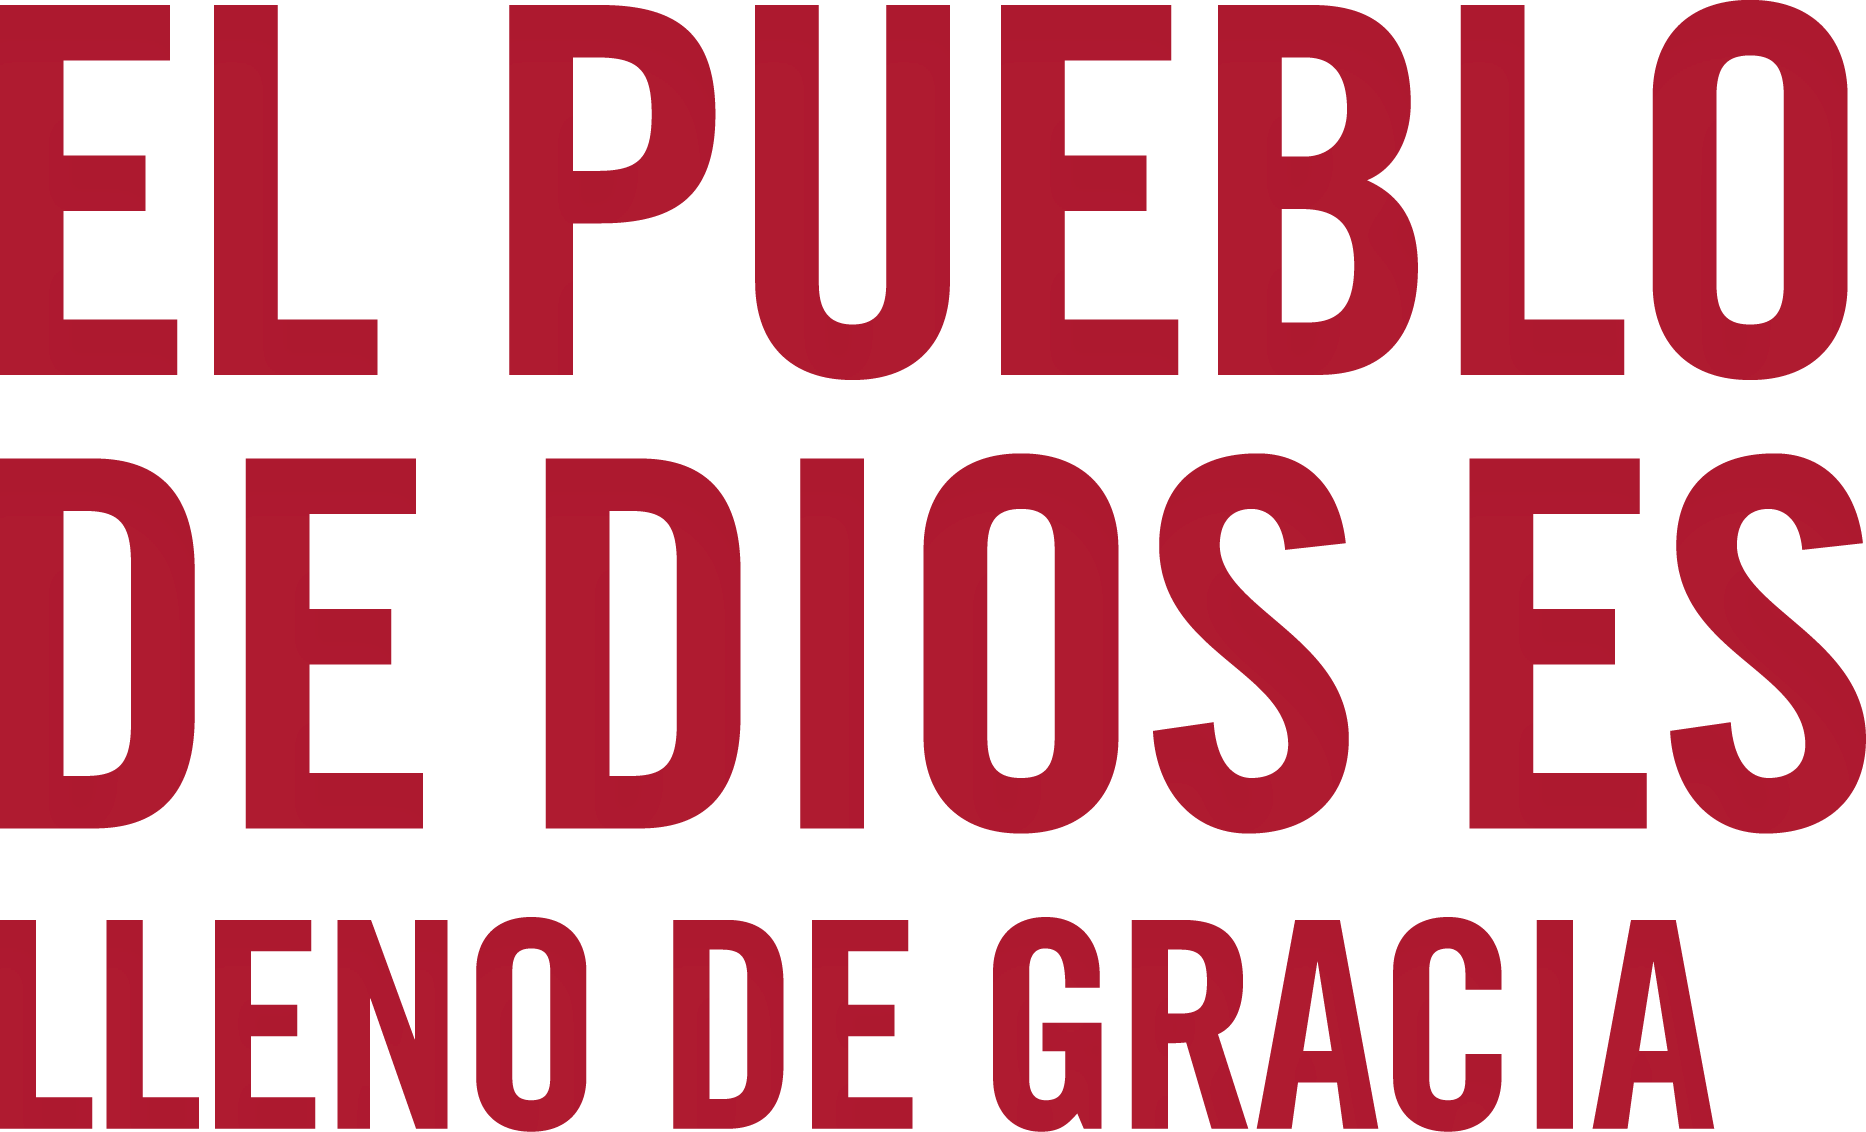 The #BeUMC campaign reminds us of who we are at our best. As people of God called The United Methodist Church, we’re faithful followers of Jesus seeking to make the world a better place. Grace-filled (praise), design asset (Spanish title).